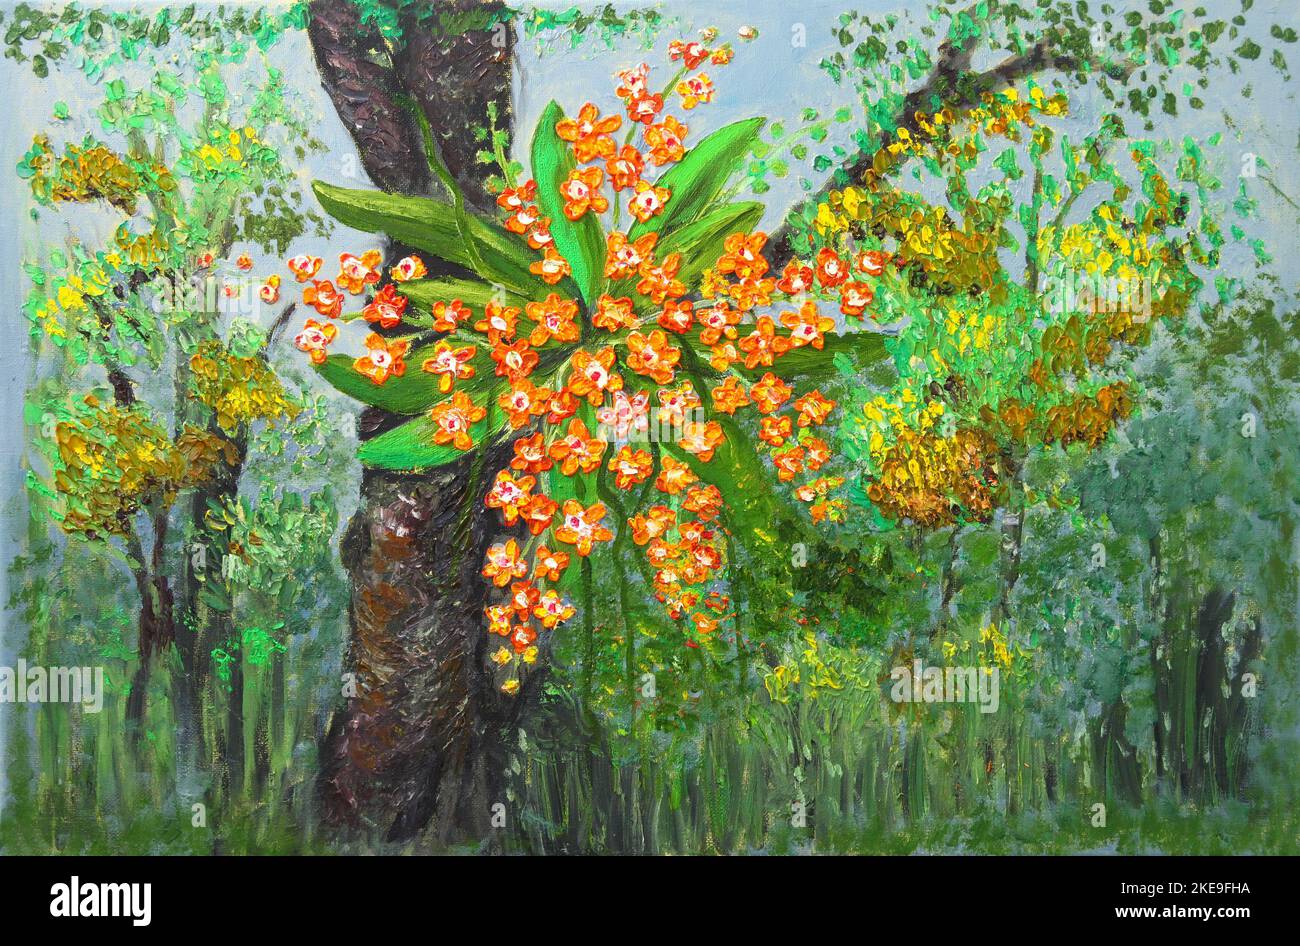 Oil painting of Wild orange orchids growing on tree trunk Stock Photo